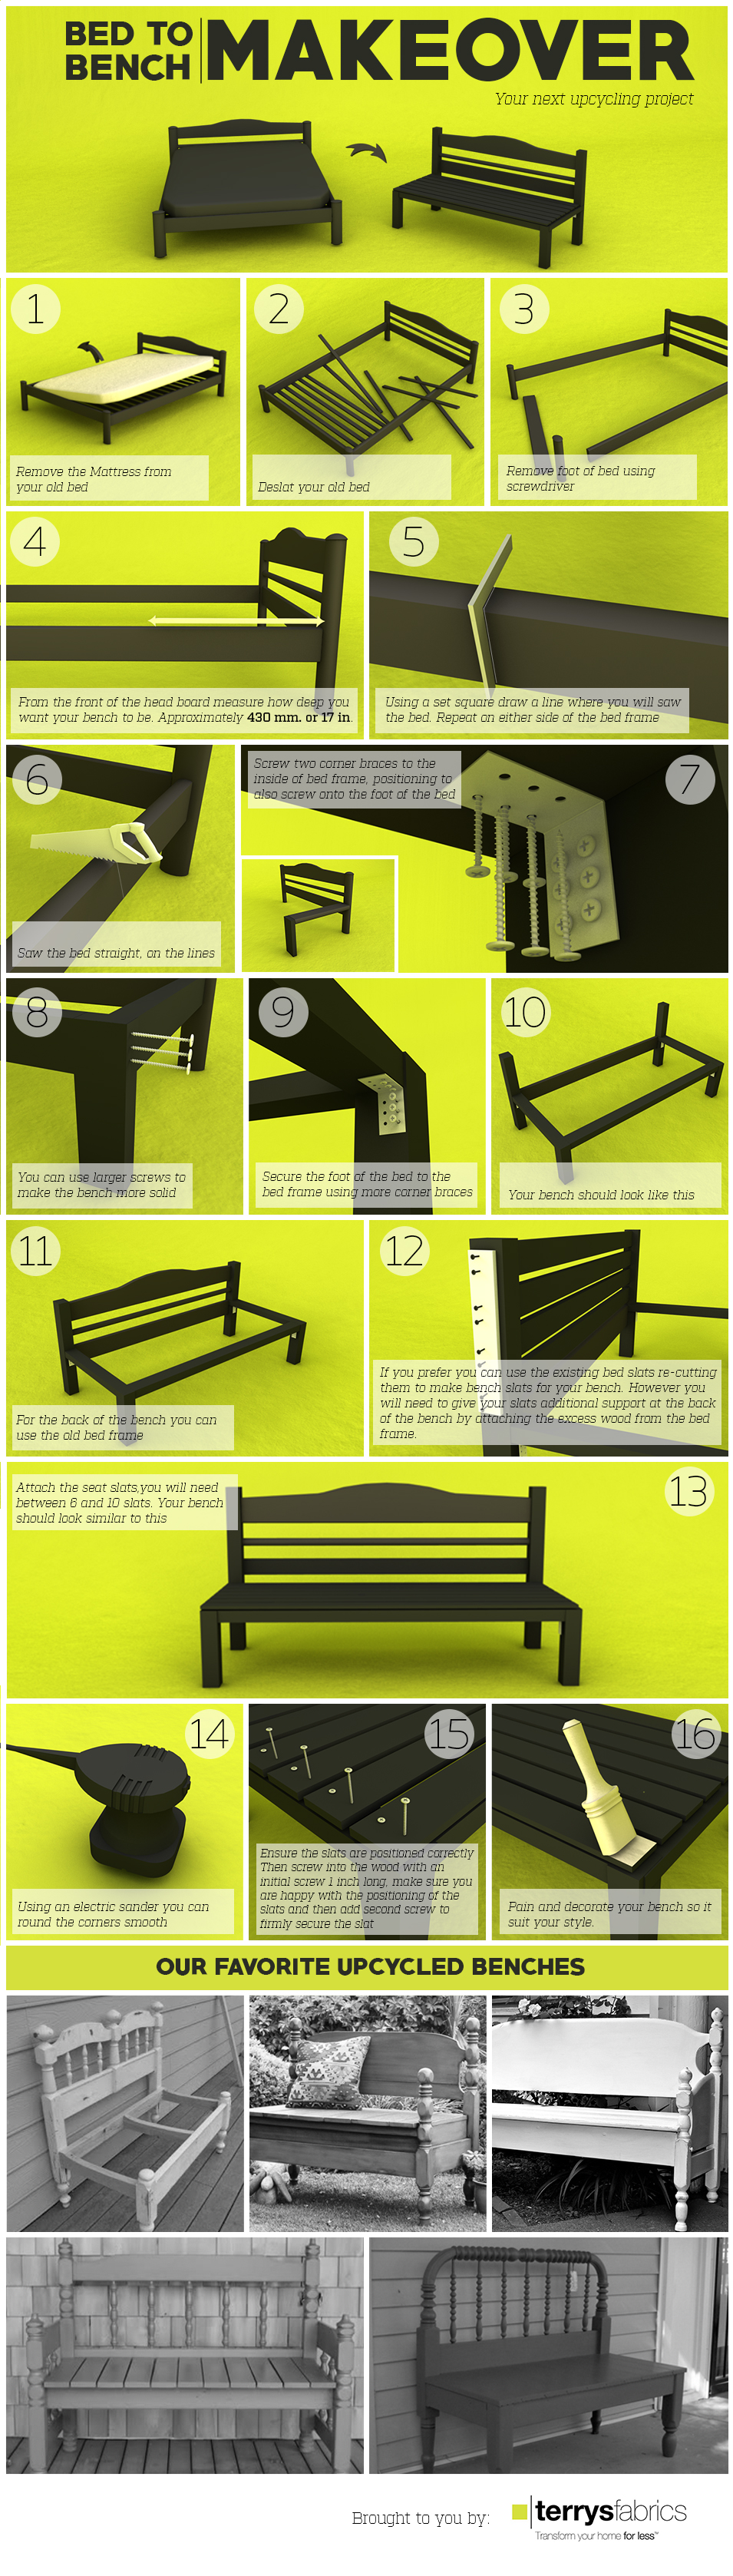 Bed to bench infographic